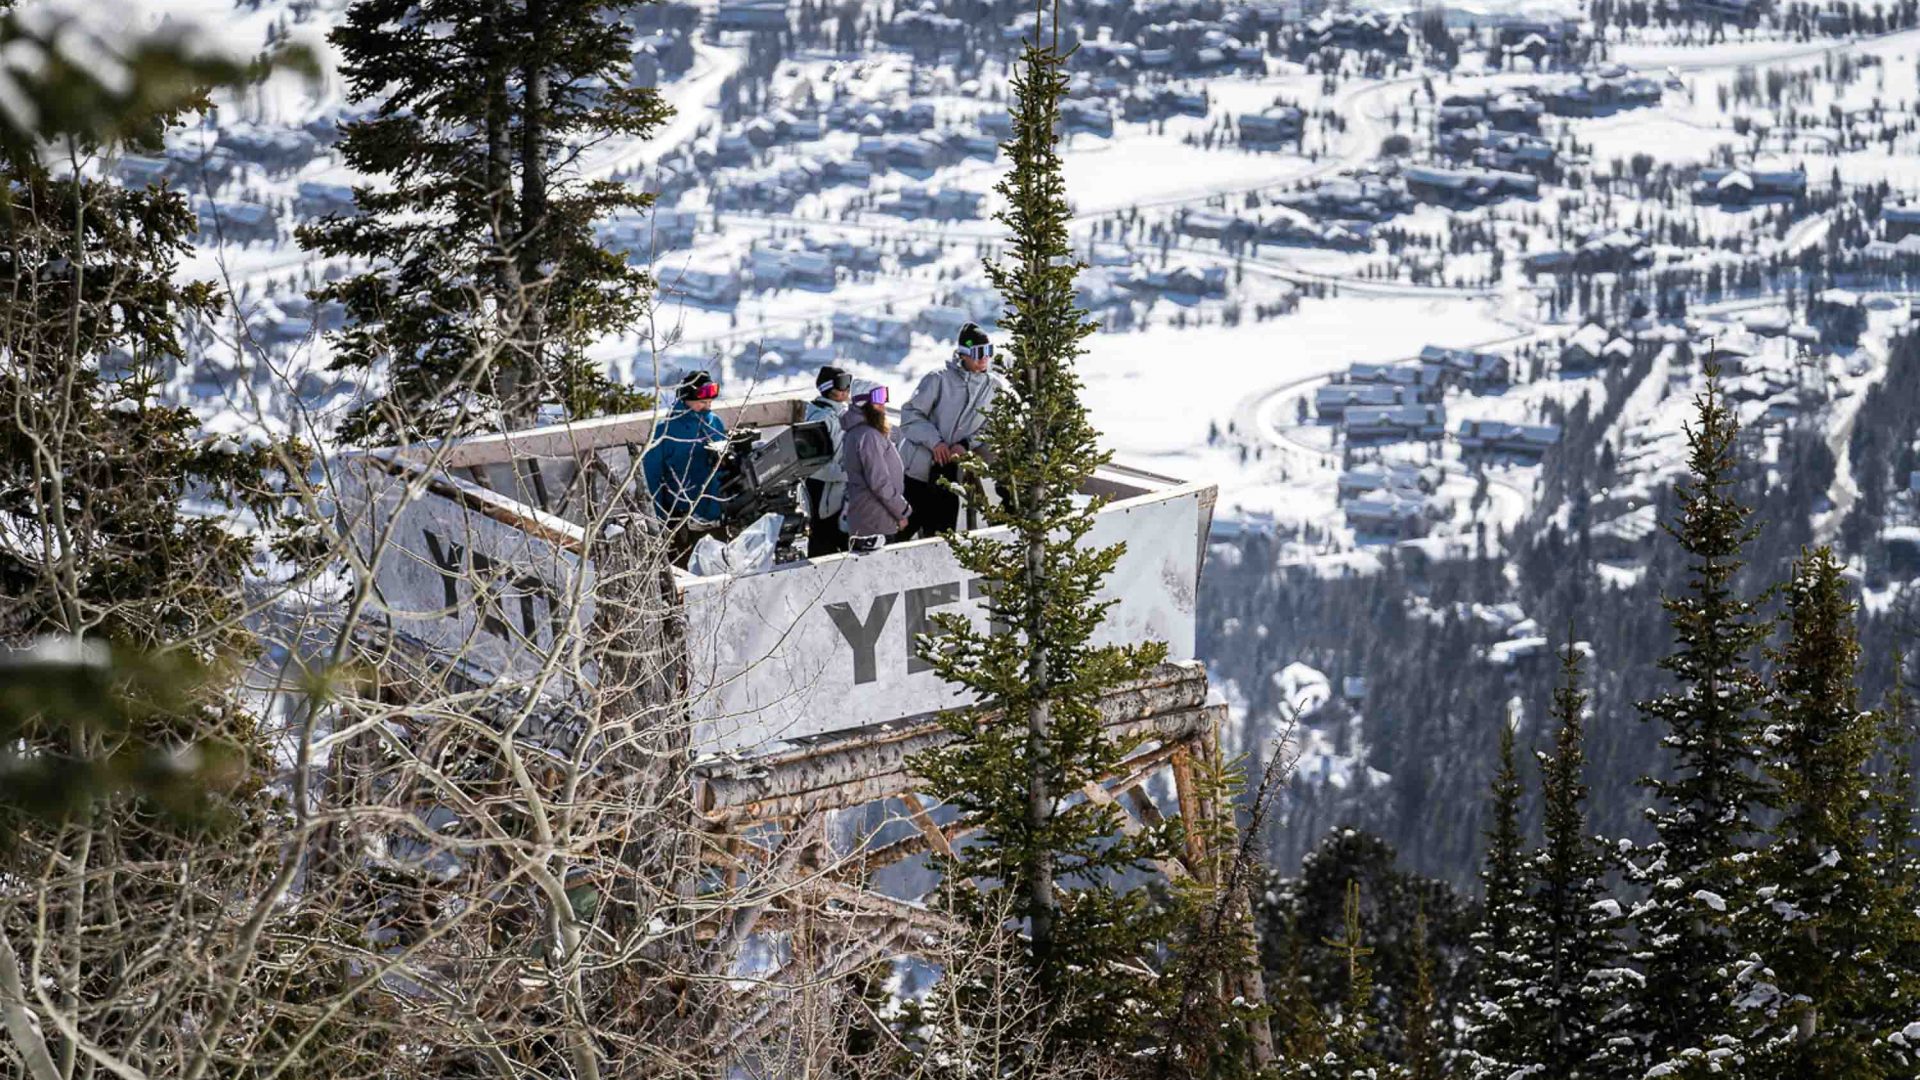 A lookout where several skiers and snowboarders stand looking out.